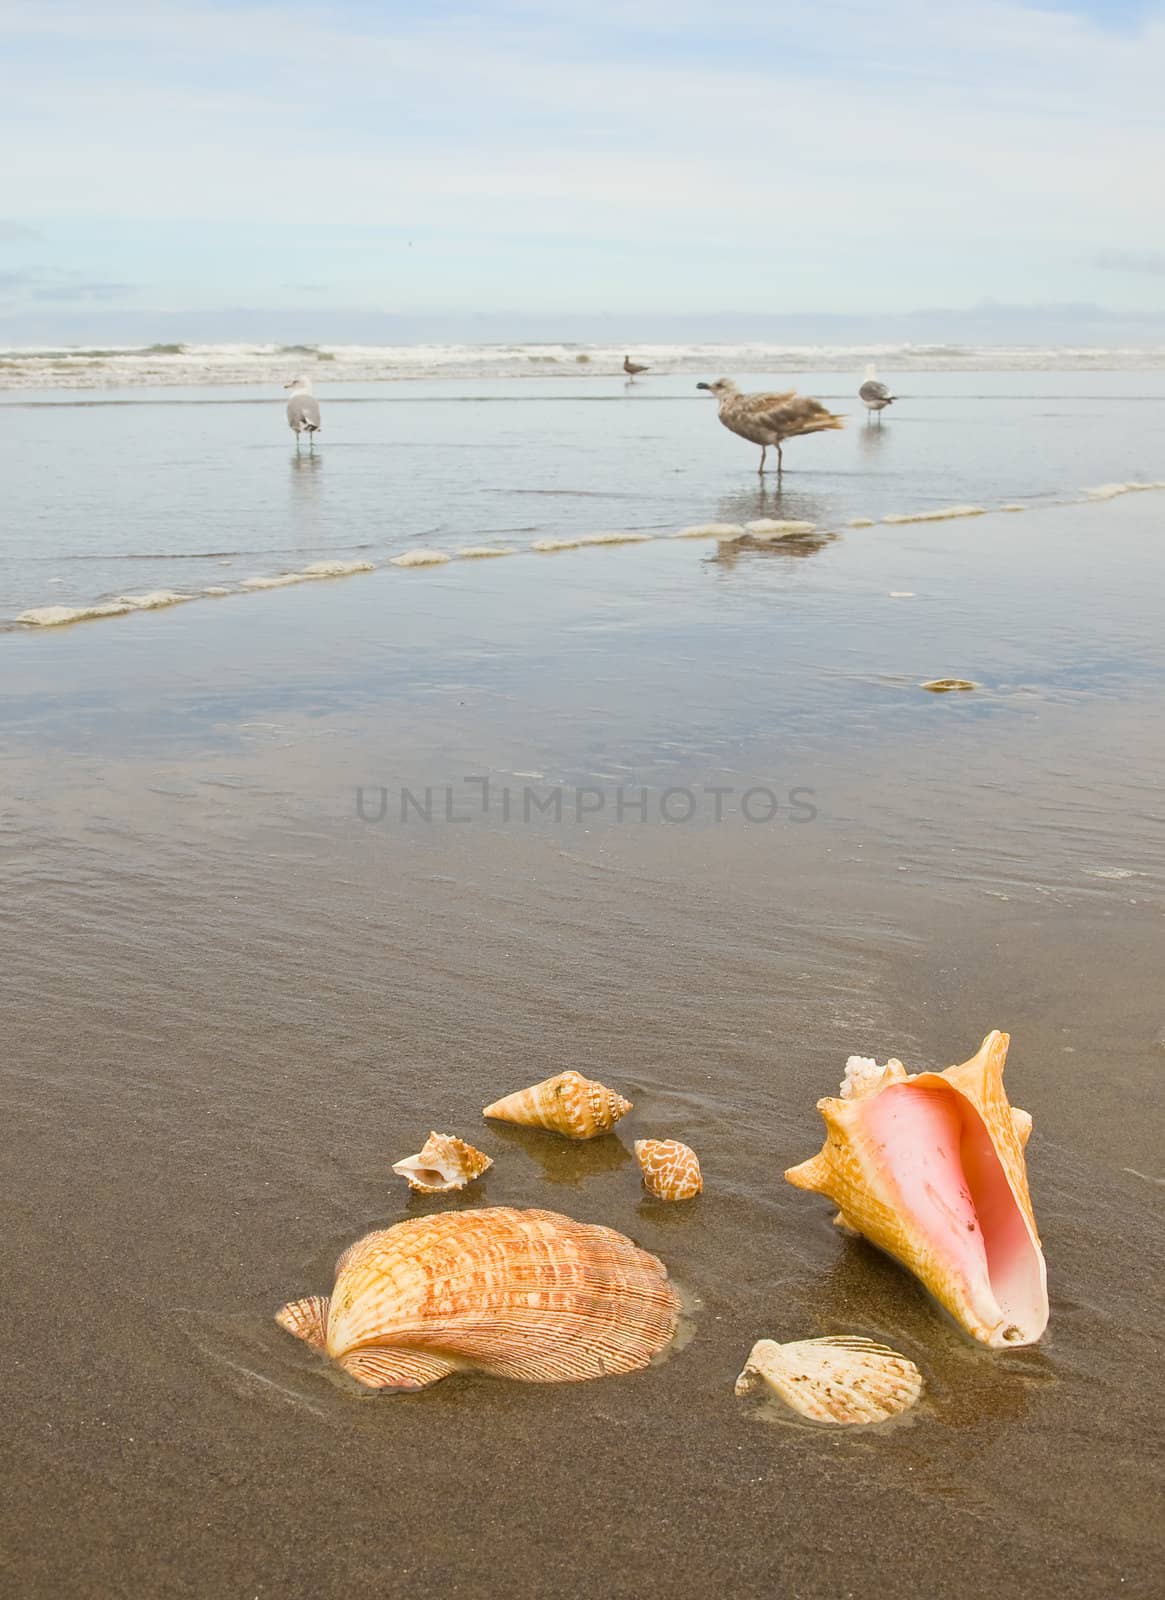 Scallop and Conch Shells on a Wet Sandy Beach with Sea Gulls in Background